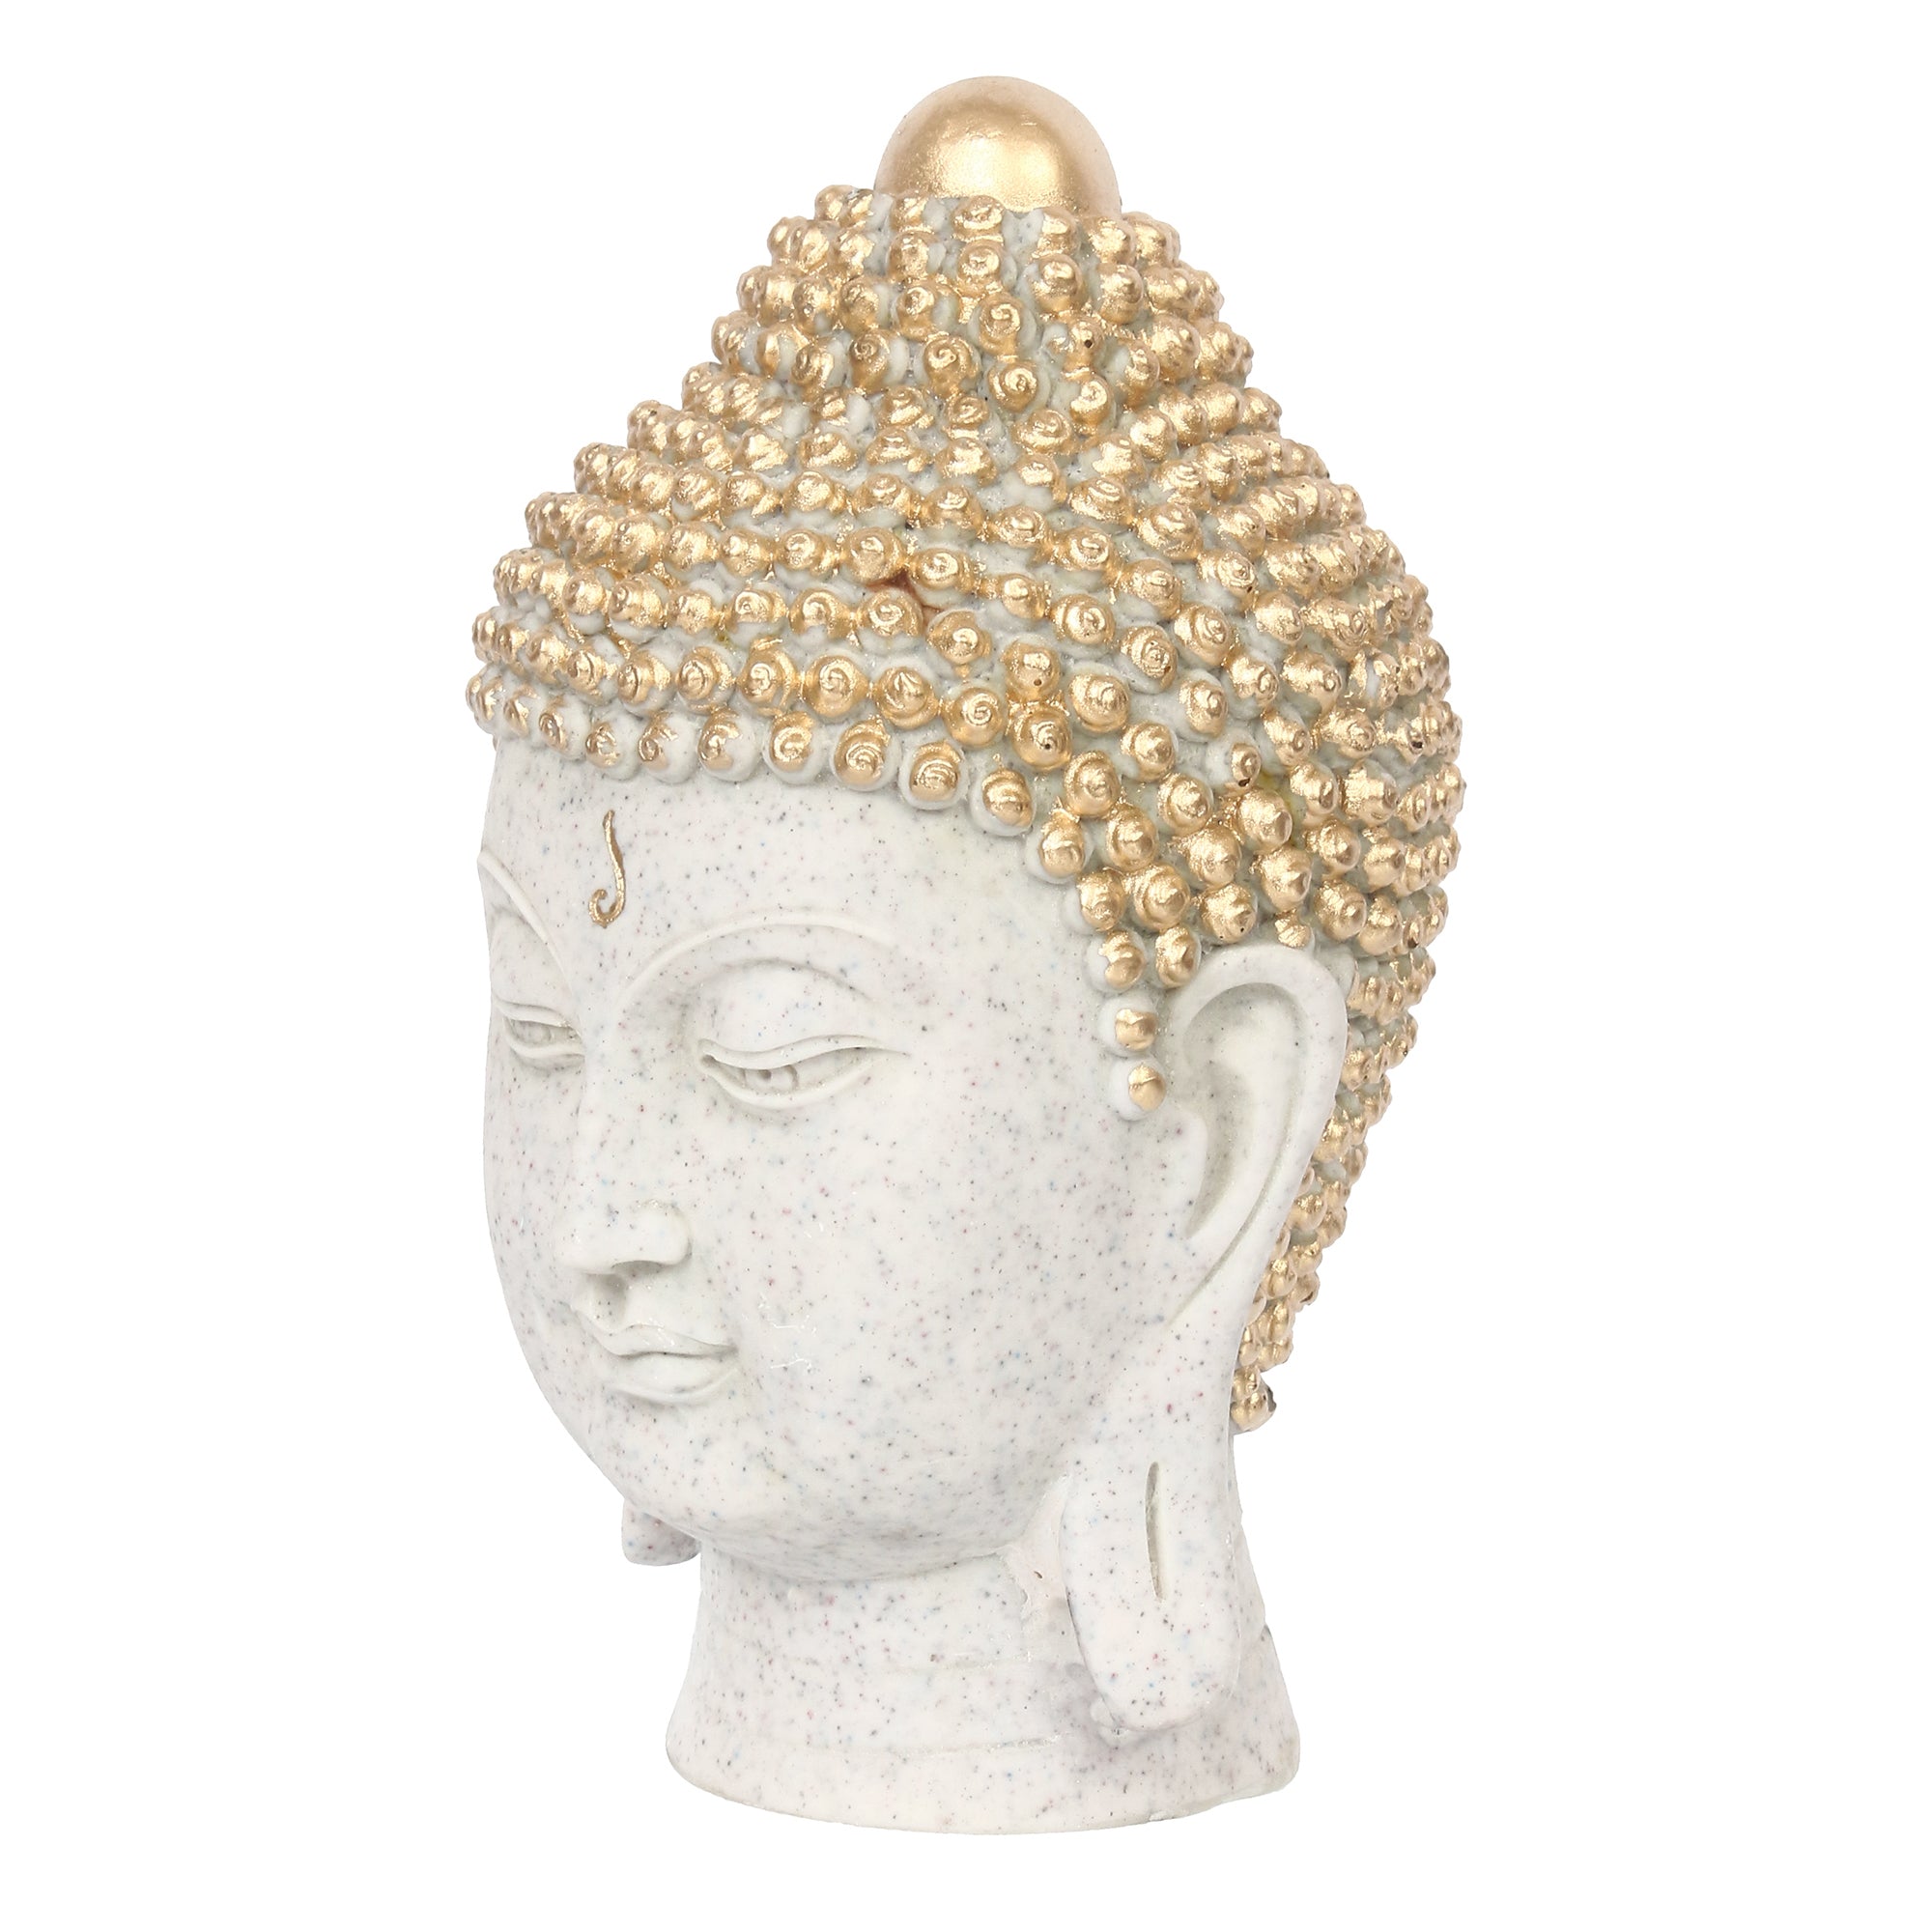 Polyresin Golden and White Meditating Buddha Head Statue 4